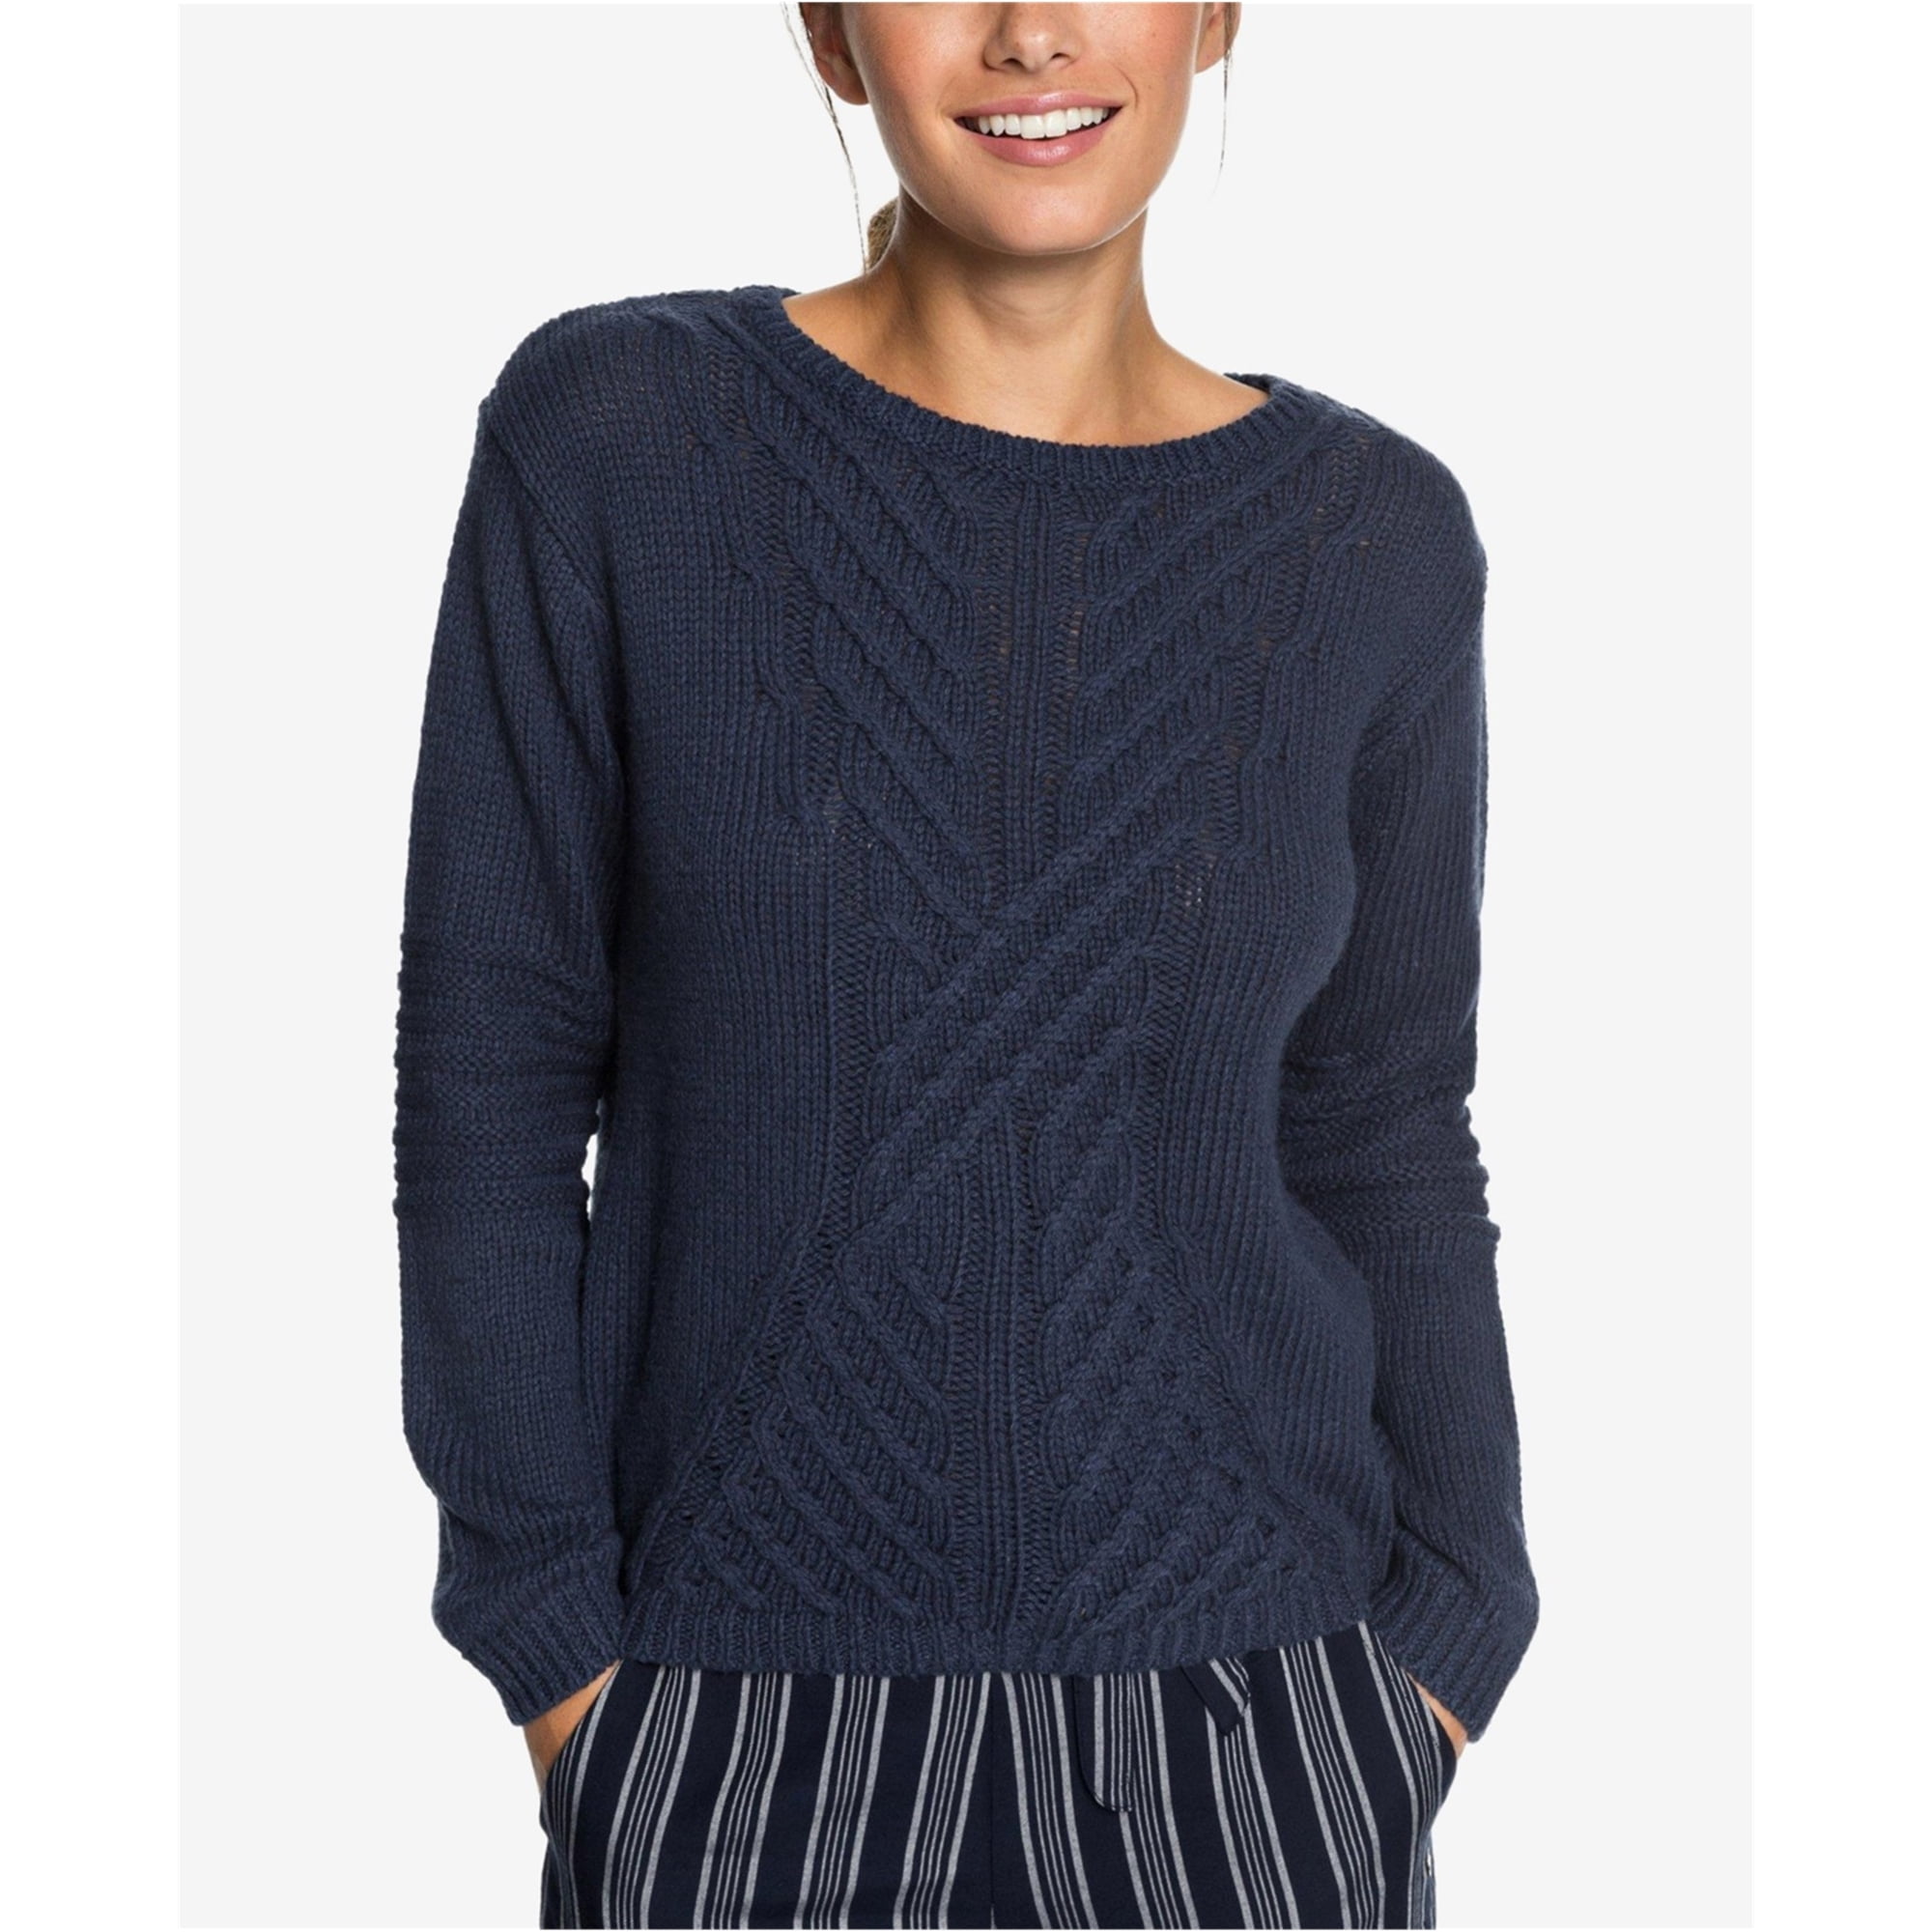 Roxy Womens Pullover Sweater